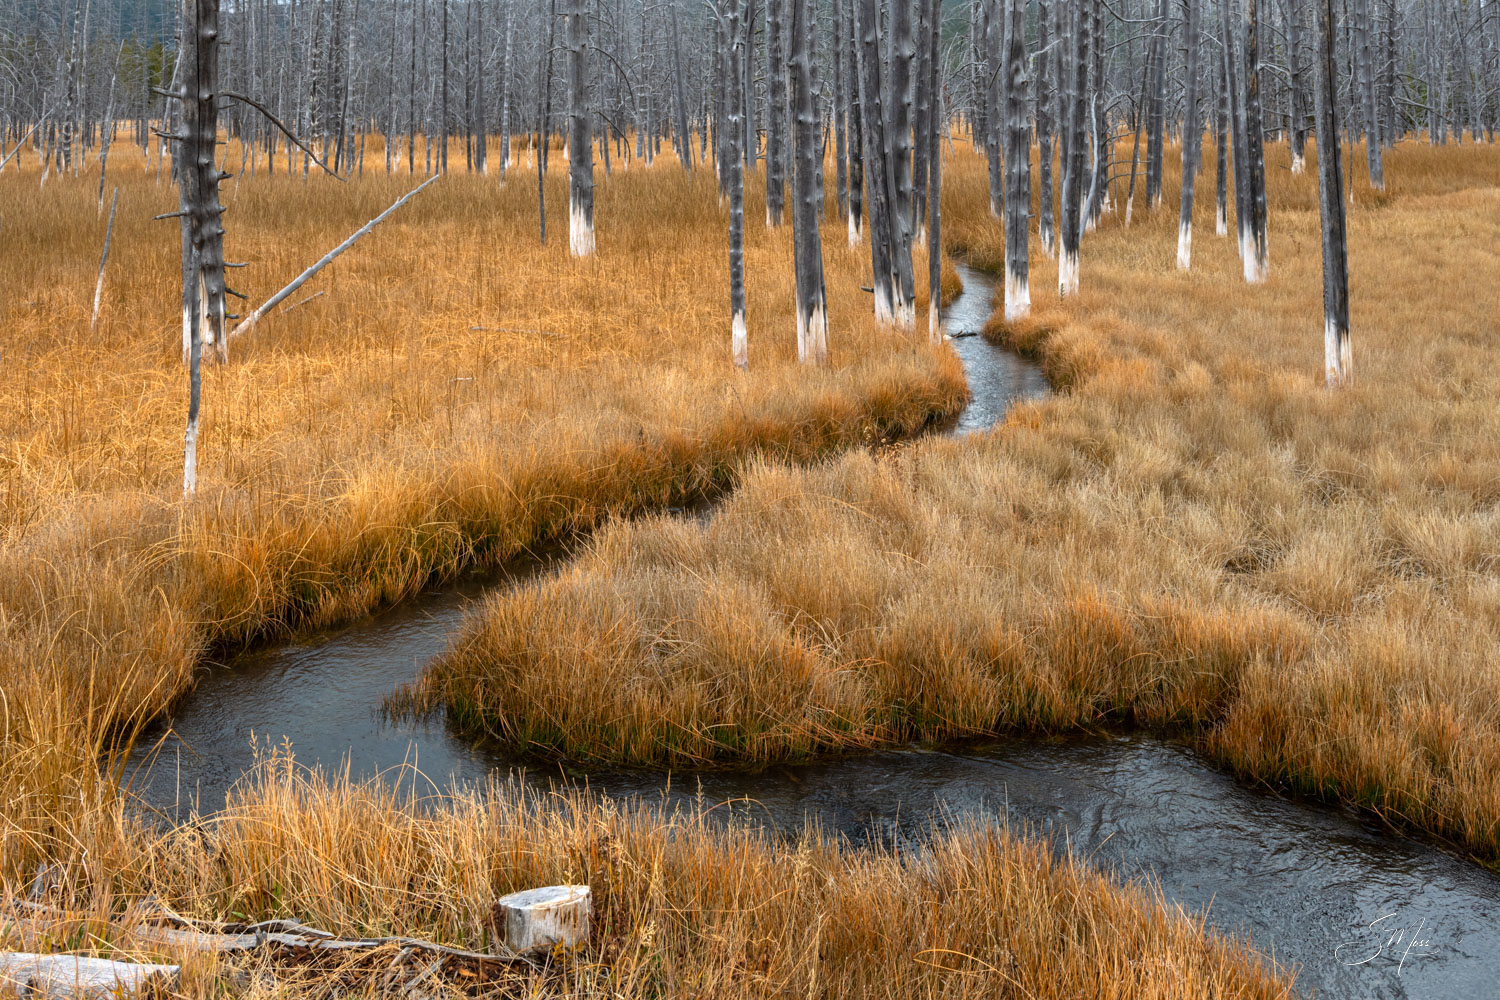 landscape, golden, grasses, river, winding, trees, color, no people, photography, National Parks, NP, Yellowstone, Wyoming